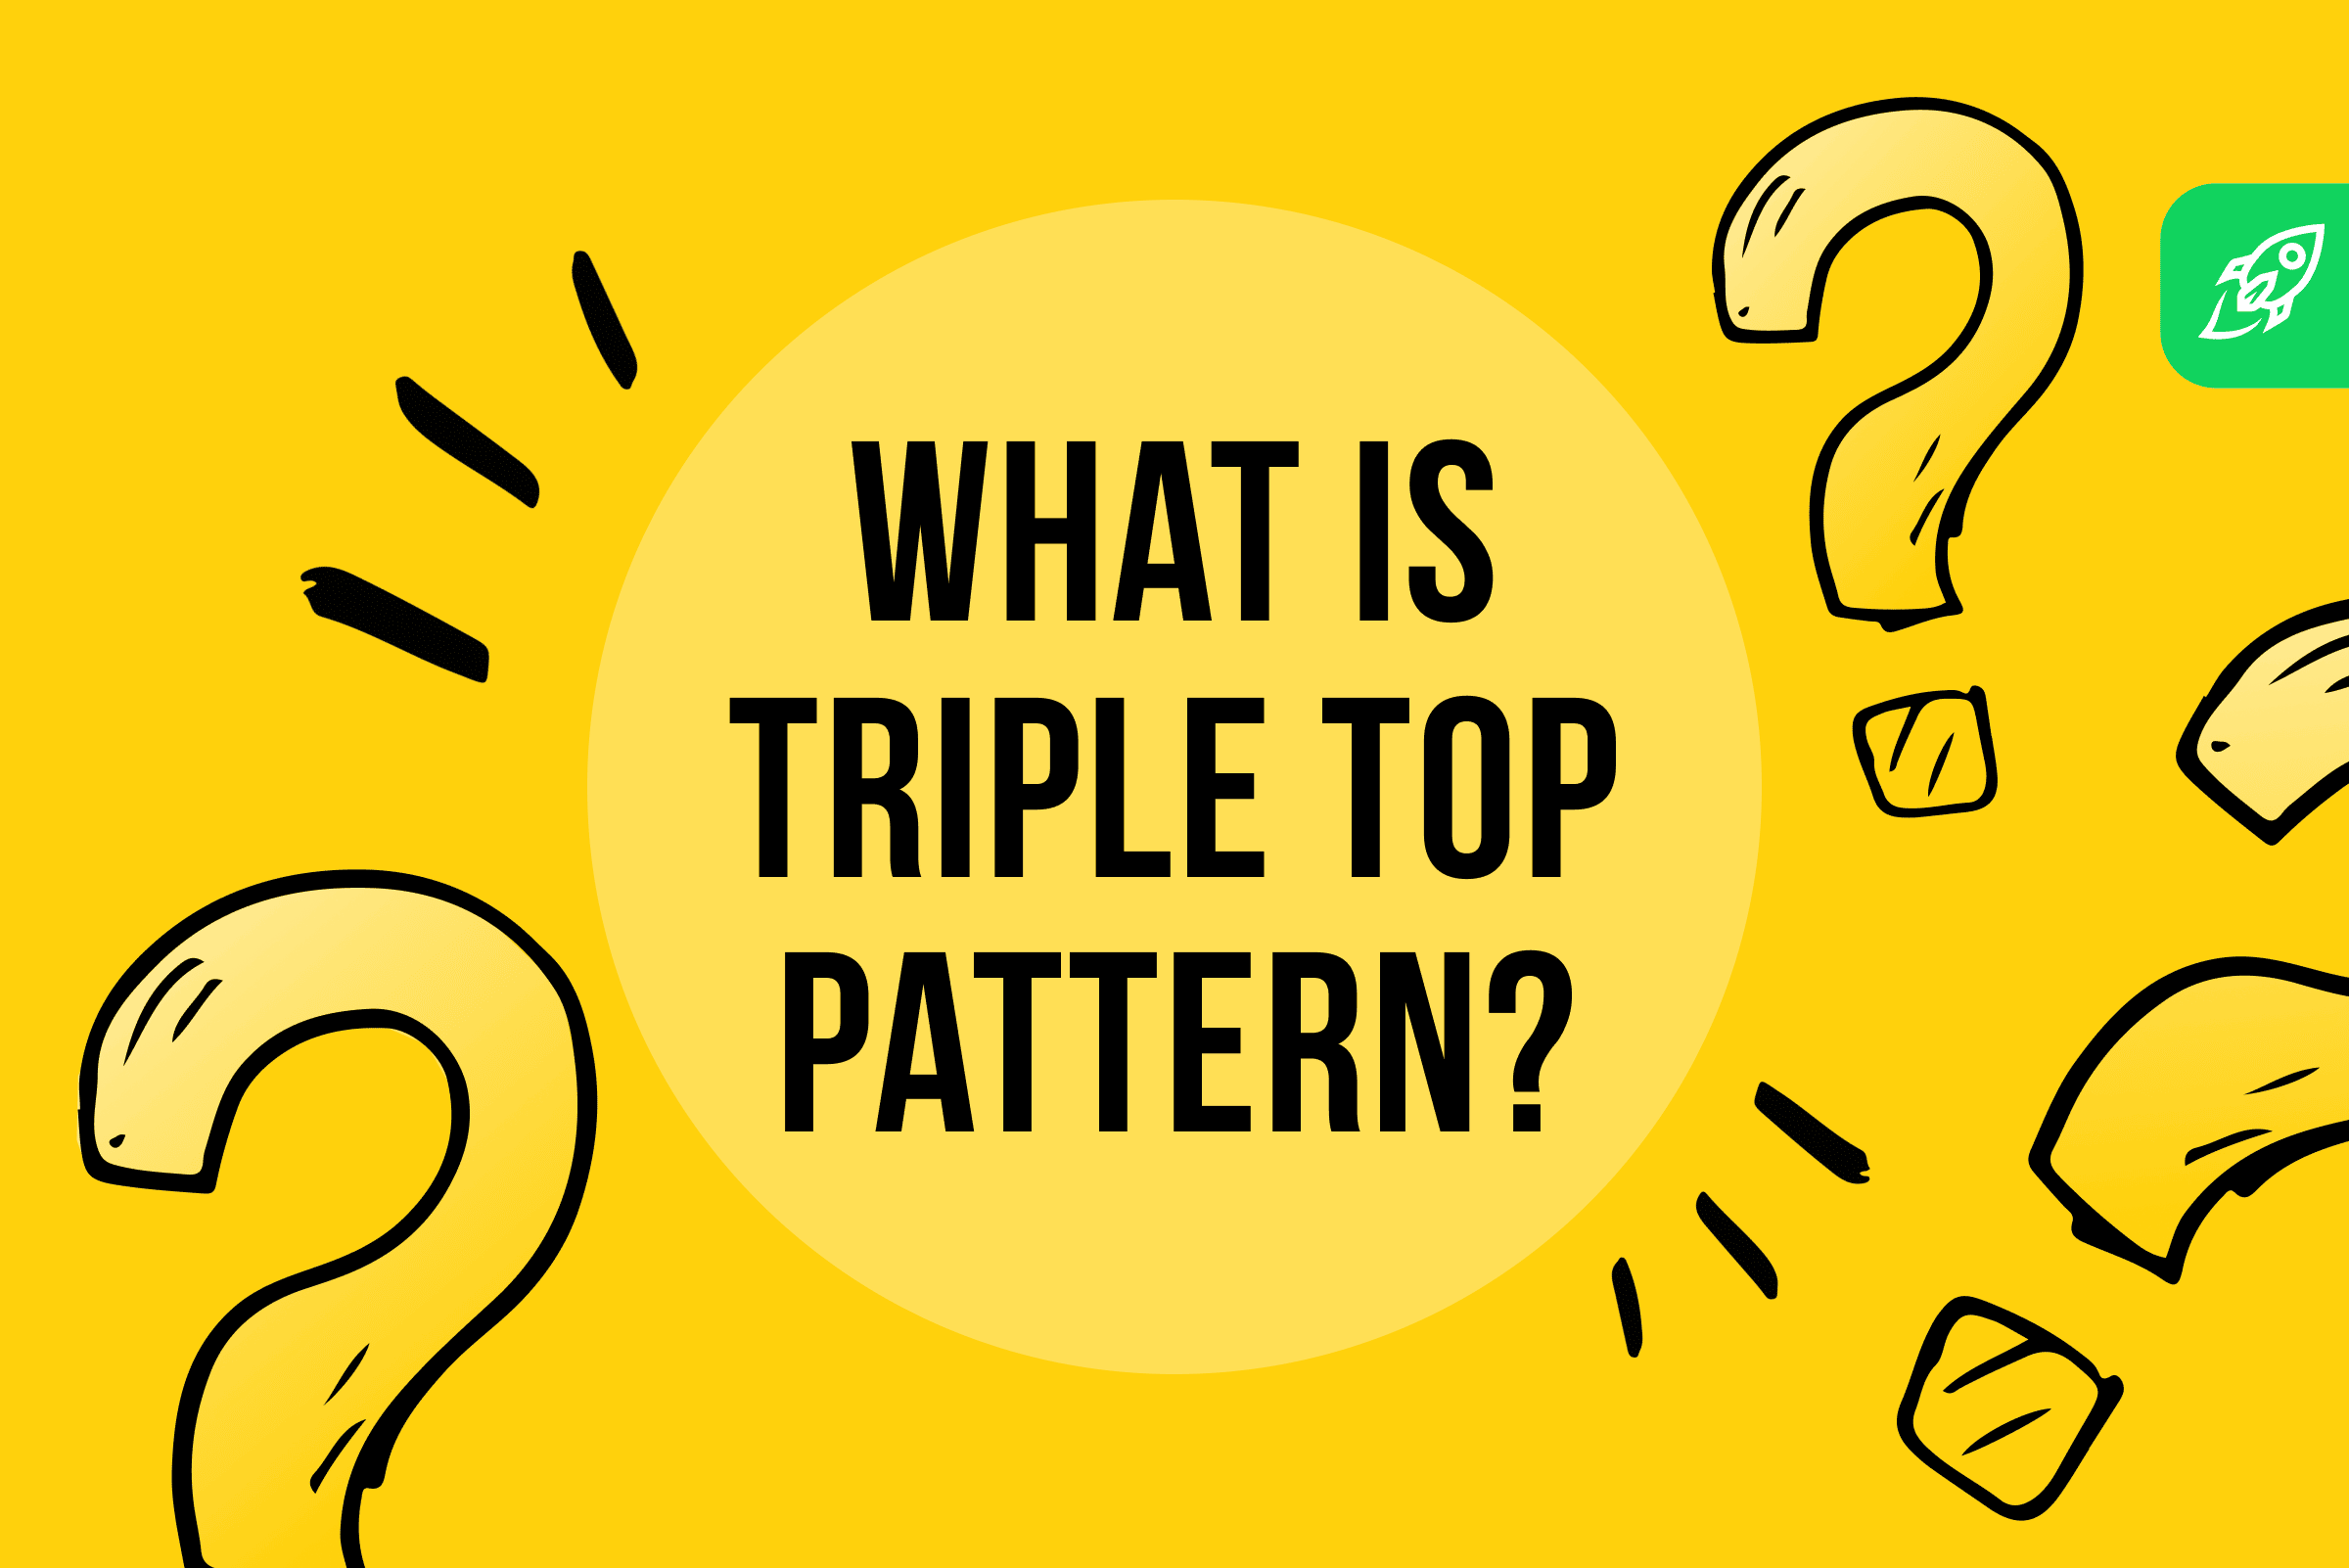 Tripple top pattern explained